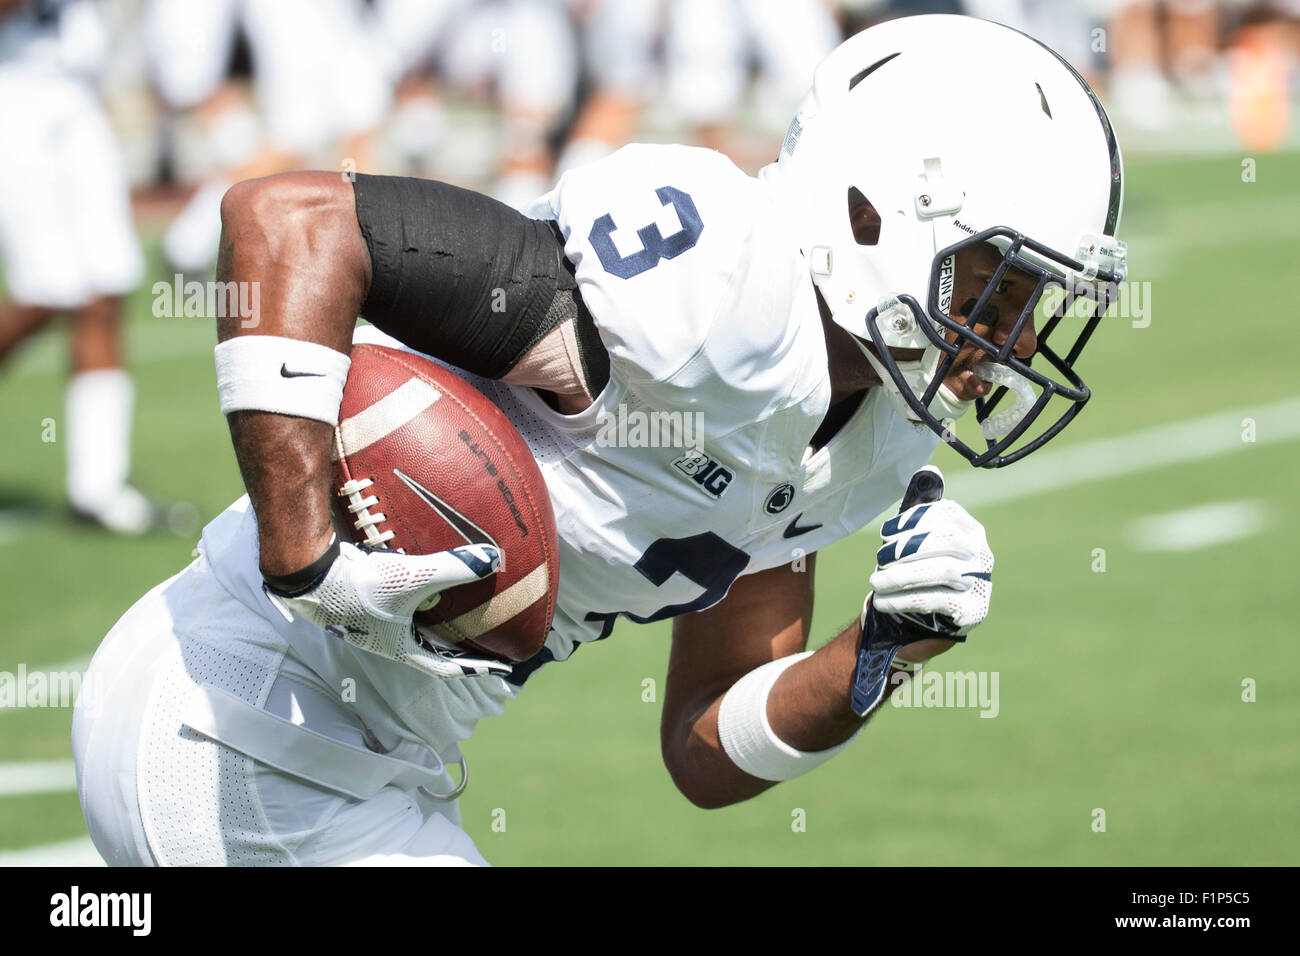 September 5, 2015: Penn State Nittany Lions wide receiver DeAndre Thompkins (3) in action during warm-ups prior to the NCAA football game between the Penn State Nittany Lions and the Temple Owls at Lincoln Financial Field in Philadelphia, Pennsylvania. Stock Photo